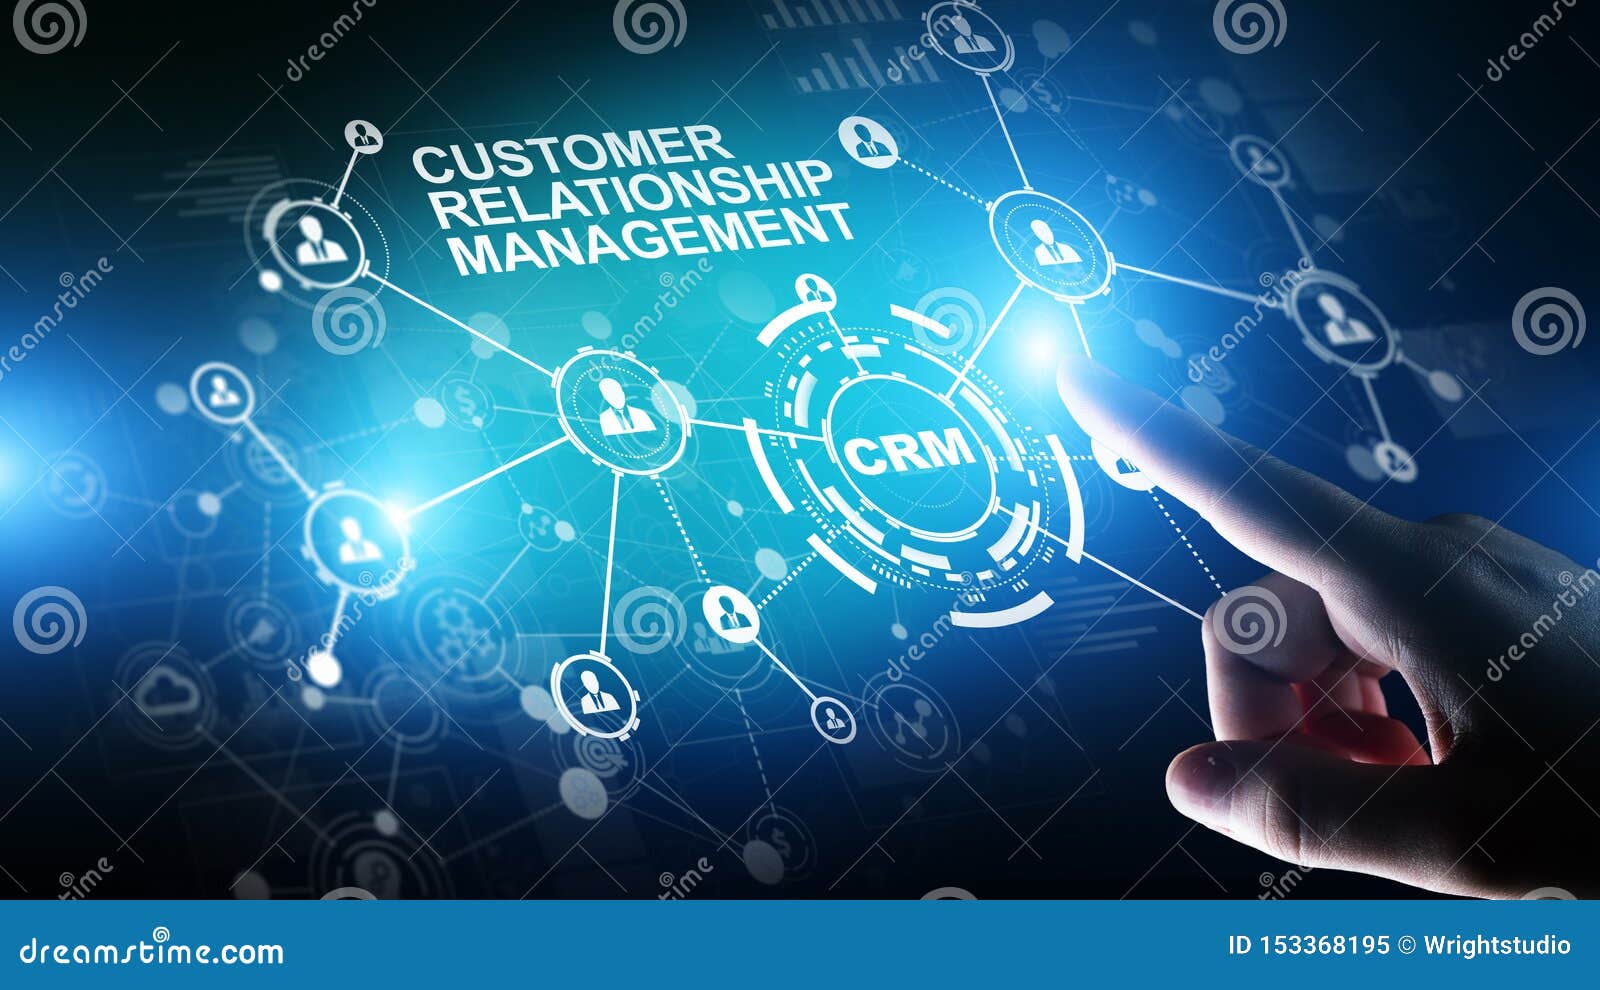 crm - customer relationship management automation system software. business and technology concept.